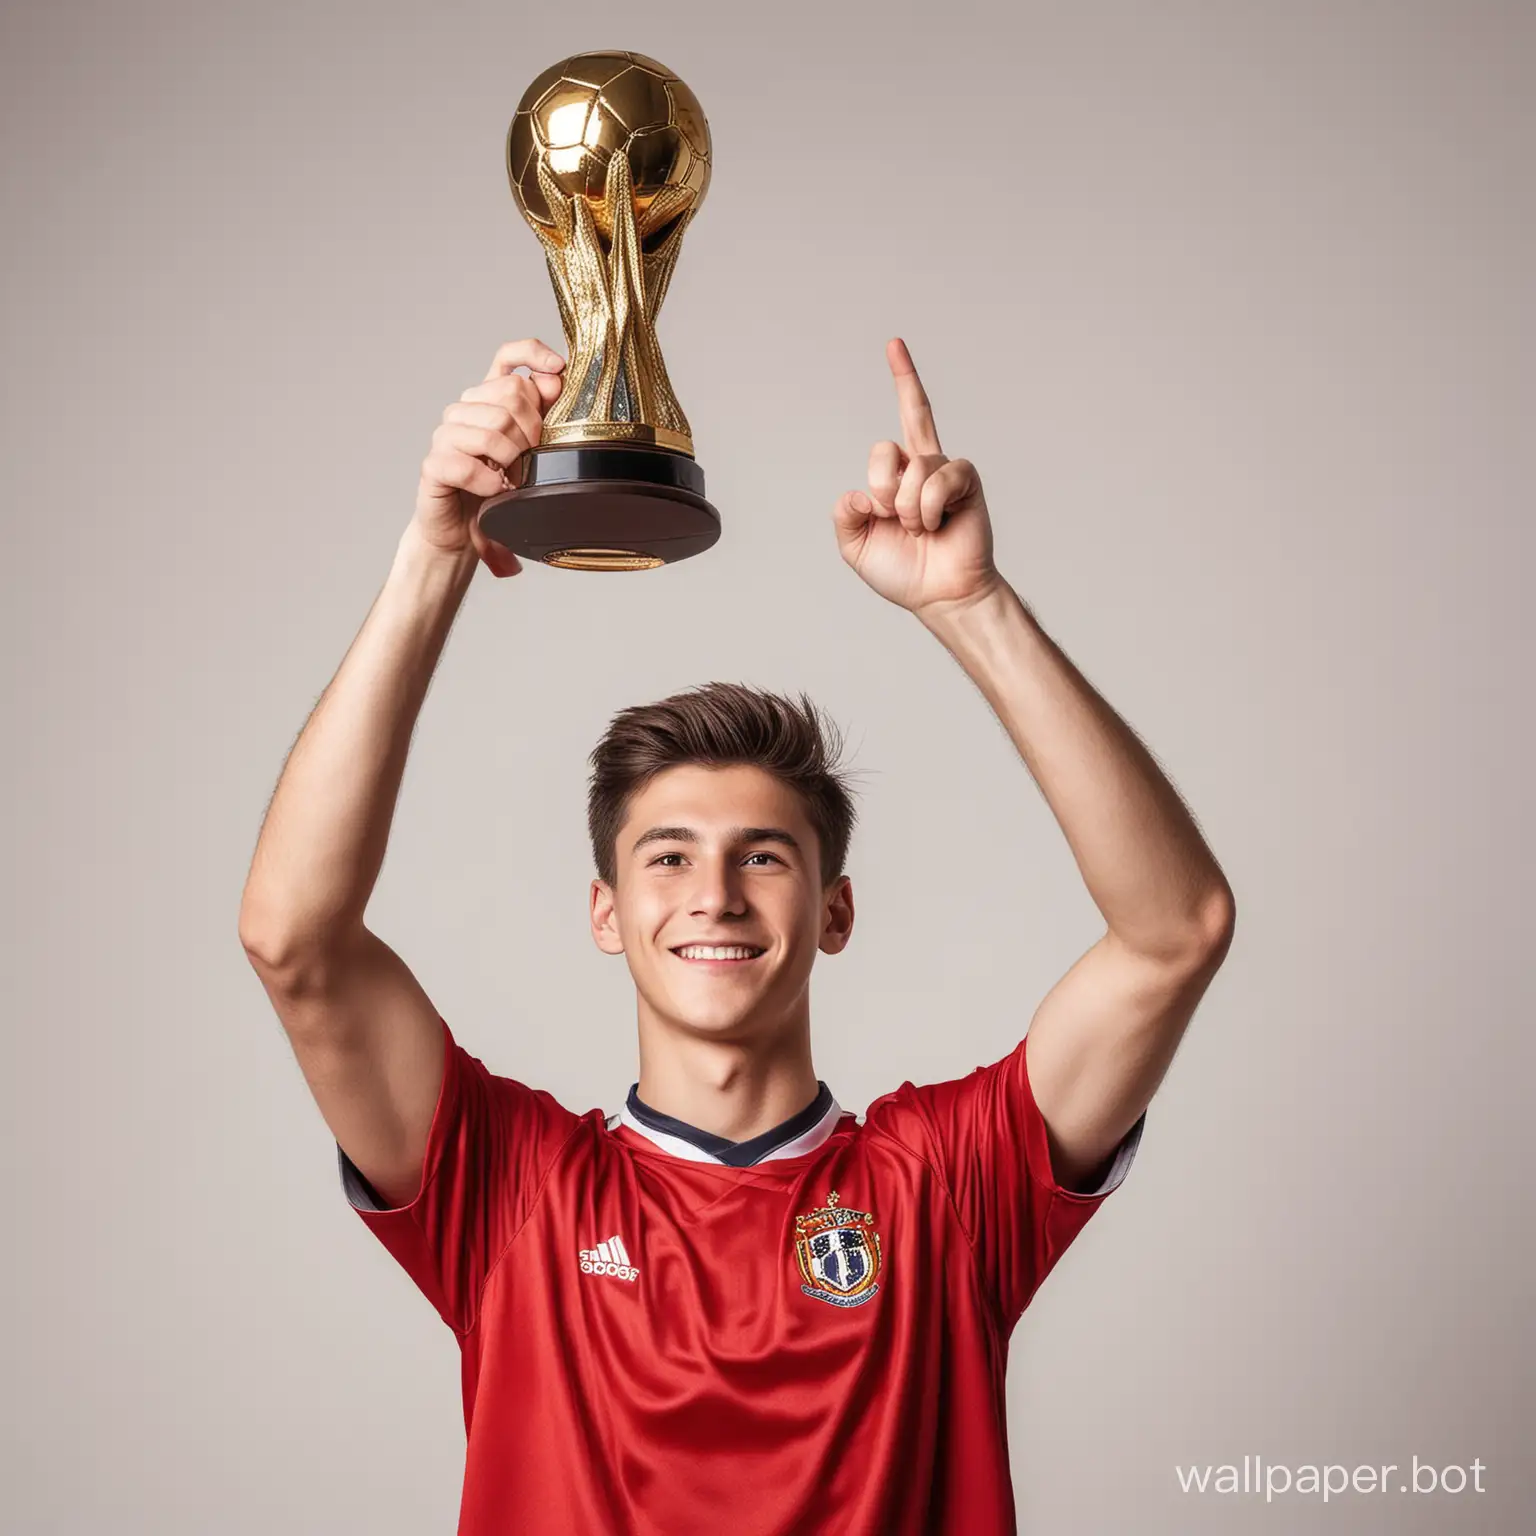 Vibrant-Young-Soccer-Star-Celebrating-Victory-with-Trophy-on-White-Background-in-16K-Resolution